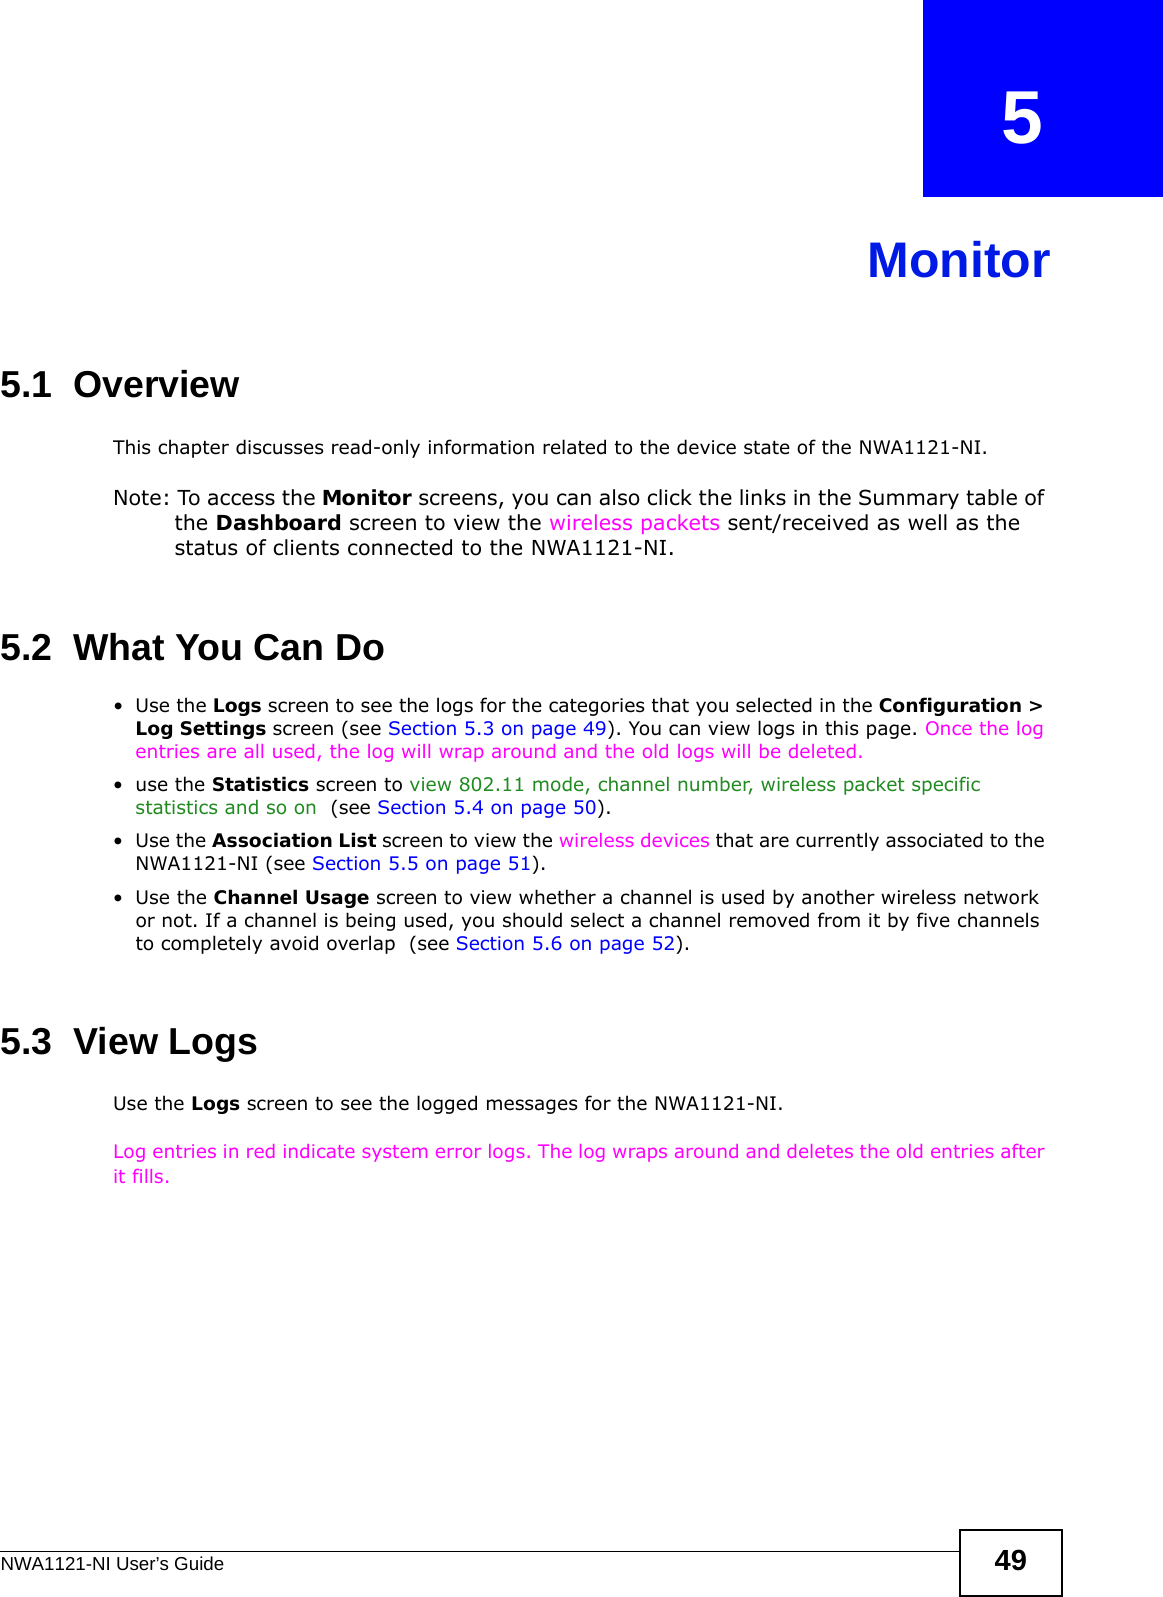 NWA1121-NI User’s Guide 49CHAPTER   5Monitor5.1  OverviewThis chapter discusses read-only information related to the device state of the NWA1121-NI. Note: To access the Monitor screens, you can also click the links in the Summary table of the Dashboard screen to view the wireless packets sent/received as well as the status of clients connected to the NWA1121-NI.5.2  What You Can Do•Use the Logs screen to see the logs for the categories that you selected in the Configuration &gt; Log Settings screen (see Section 5.3 on page 49). You can view logs in this page. Once the log entries are all used, the log will wrap around and the old logs will be deleted.•use the Statistics screen to view 802.11 mode, channel number, wireless packet specific statistics and so on  (see Section 5.4 on page 50).•Use the Association List screen to view the wireless devices that are currently associated to the NWA1121-NI (see Section 5.5 on page 51).•Use the Channel Usage screen to view whether a channel is used by another wireless network or not. If a channel is being used, you should select a channel removed from it by five channels to completely avoid overlap  (see Section 5.6 on page 52). 5.3  View Logs Use the Logs screen to see the logged messages for the NWA1121-NI. Log entries in red indicate system error logs. The log wraps around and deletes the old entries after it fills. 